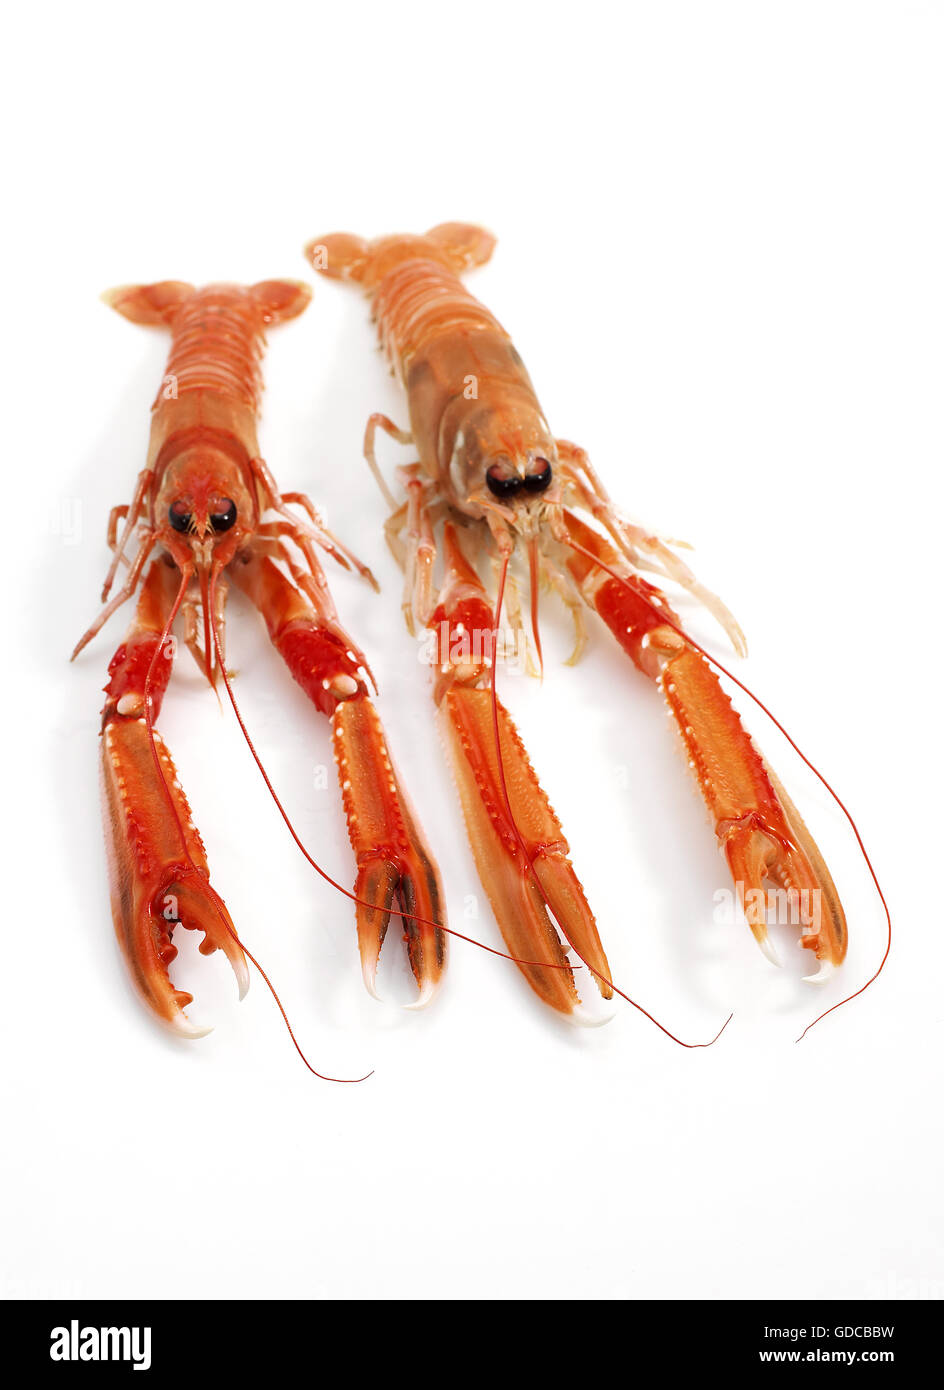 Dublin Bay Prawn or Norway Lobster or Scampi, nephrops norvegicus, Crustacean against White Background Stock Photo